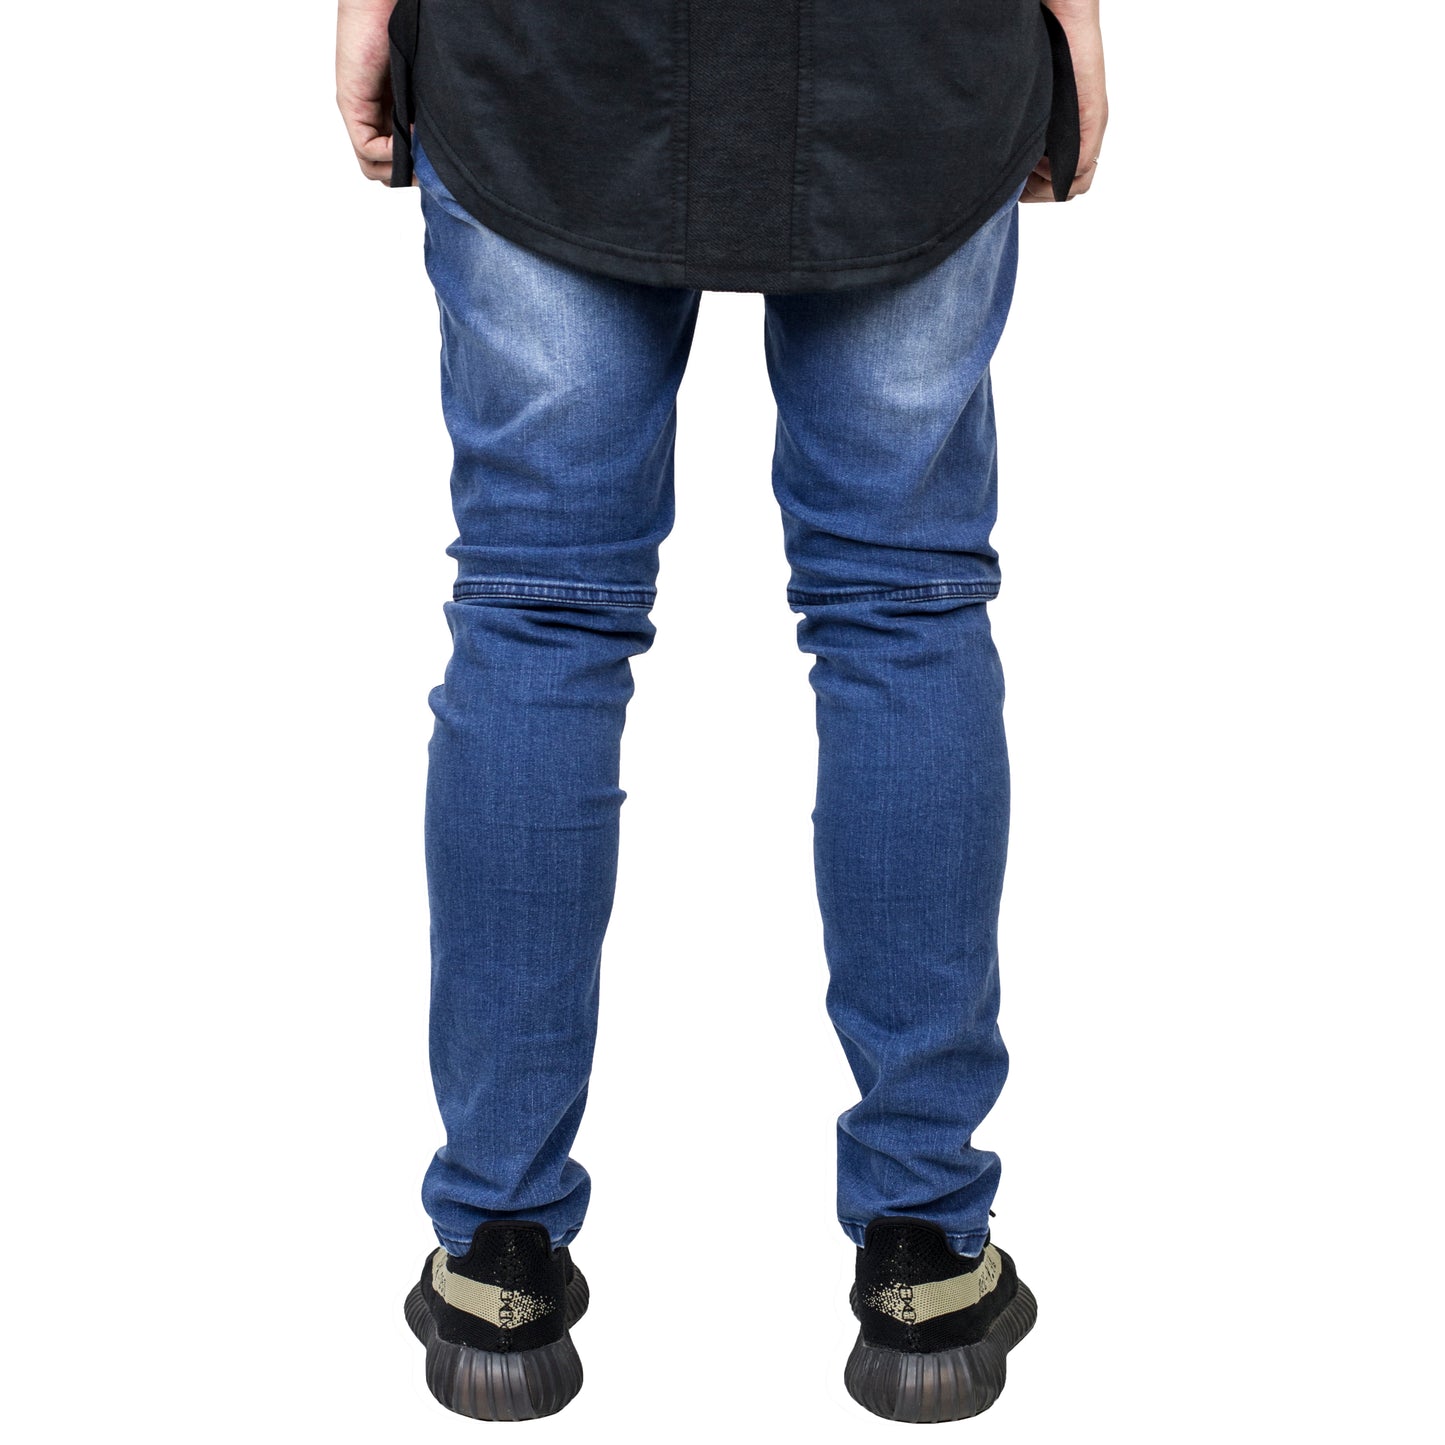 Panther Jeans : Blue Wash